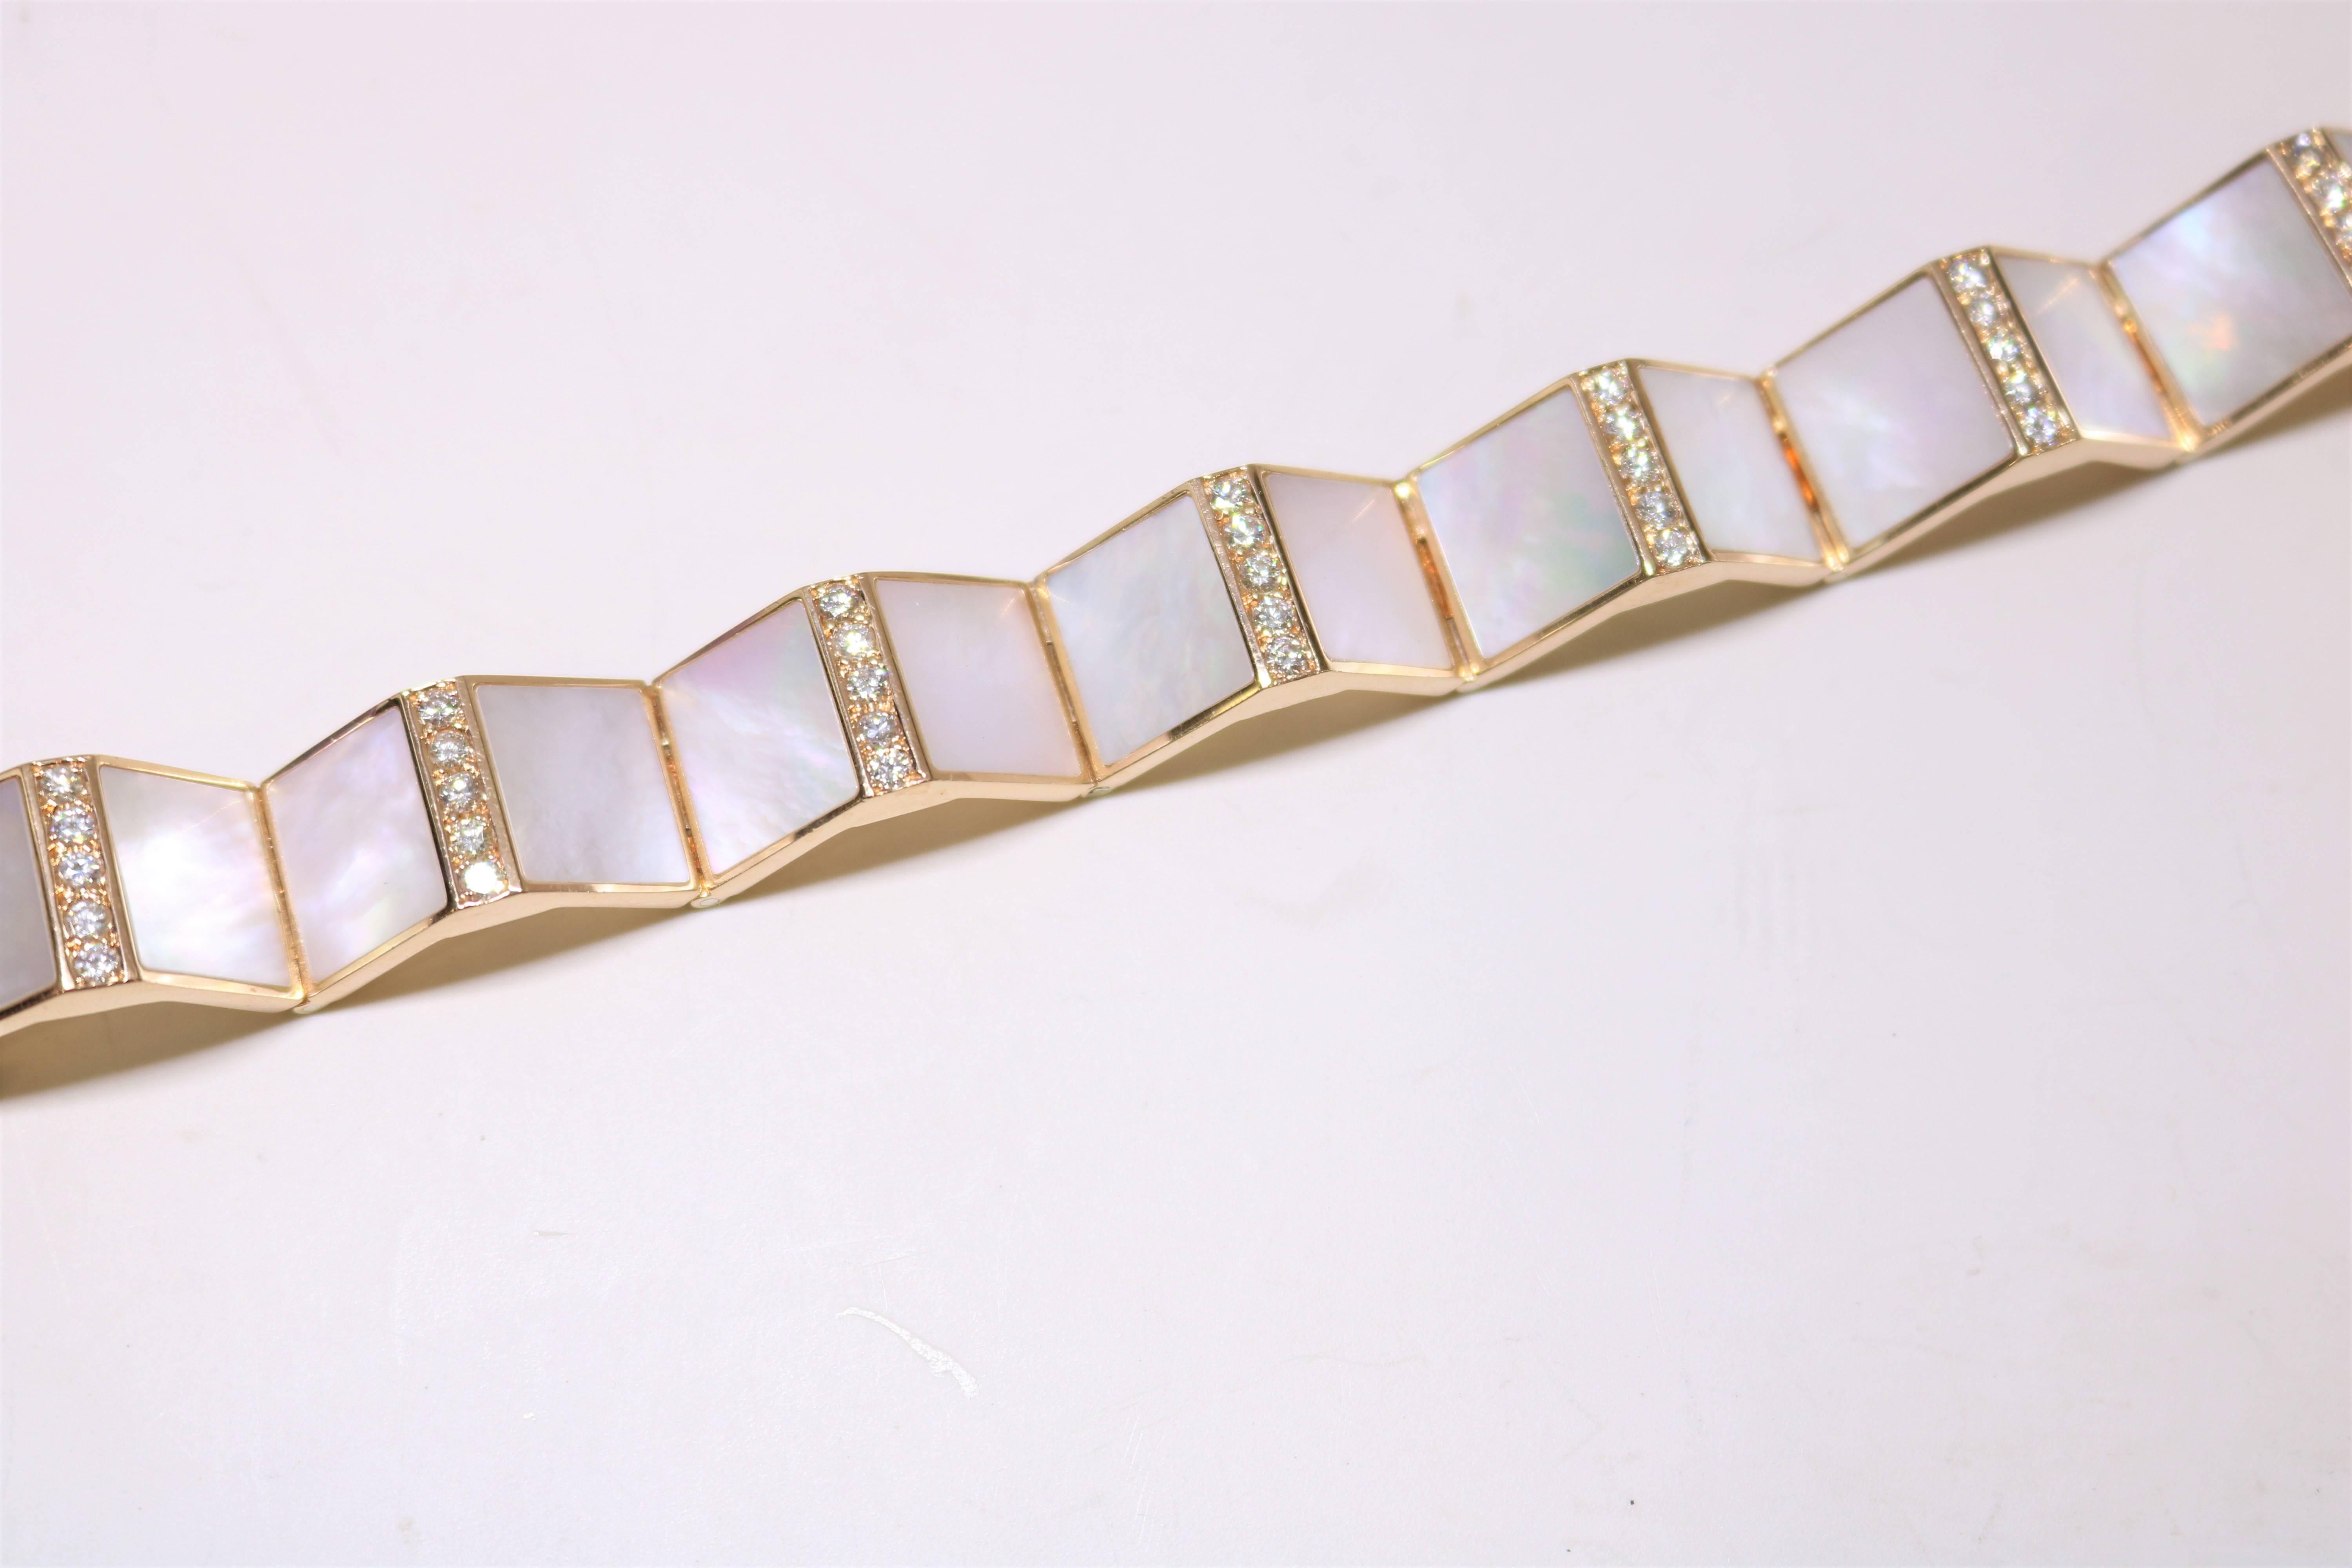 Diamond Pyramid Bracelet is set in 18k Rose Gold with diamonds and mother of pearl set in pyramid style bracelet. 